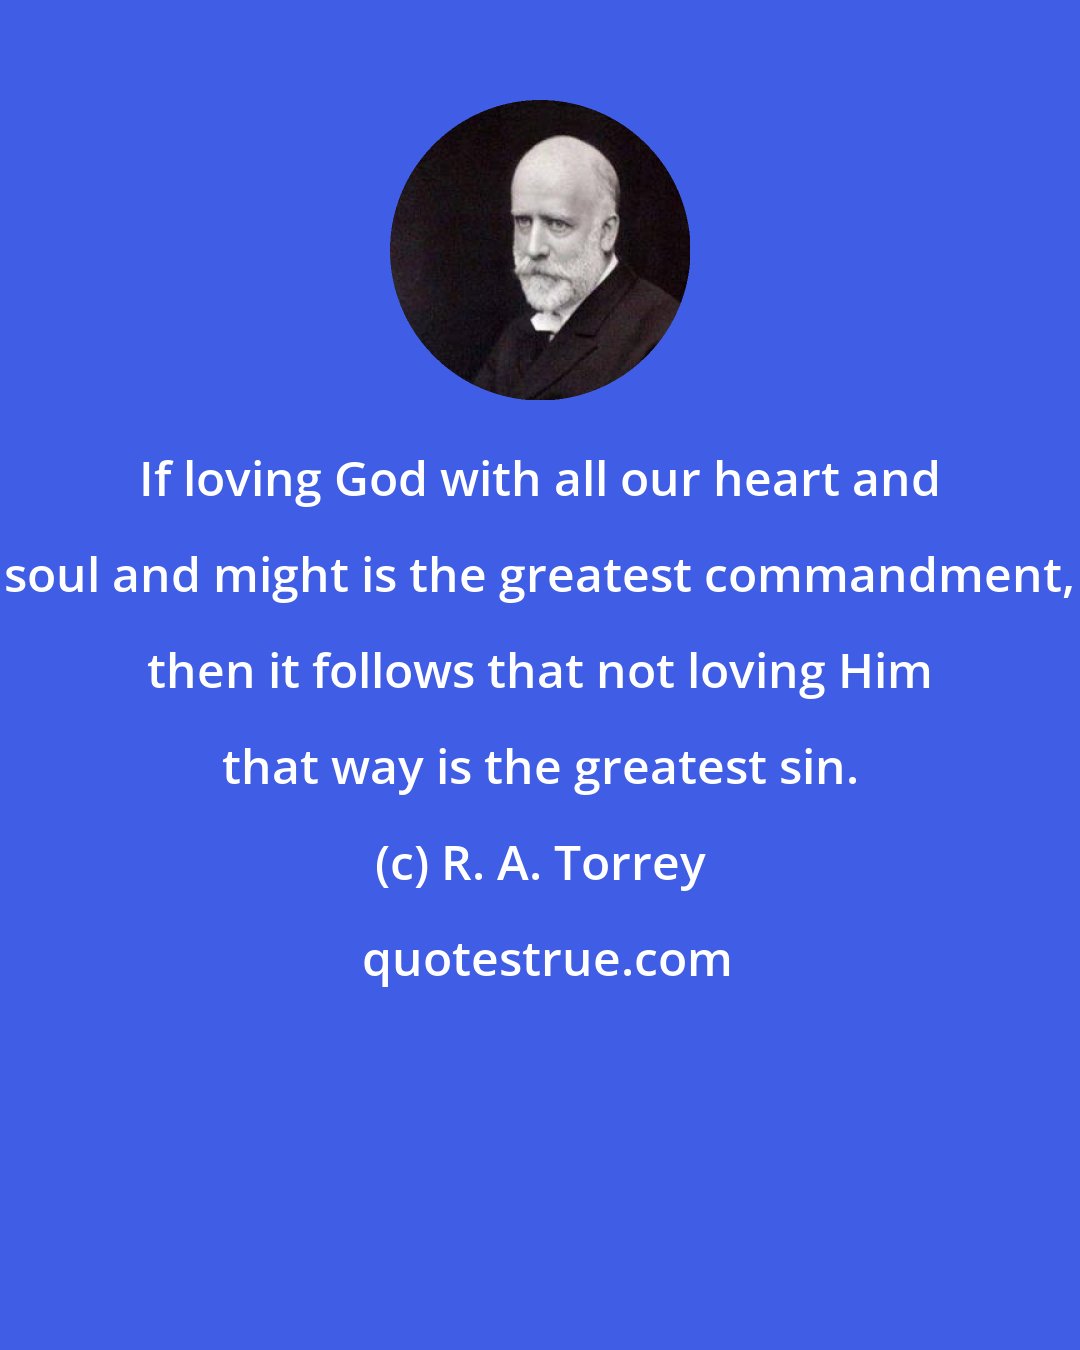 R. A. Torrey: If loving God with all our heart and soul and might is the greatest commandment, then it follows that not loving Him that way is the greatest sin.